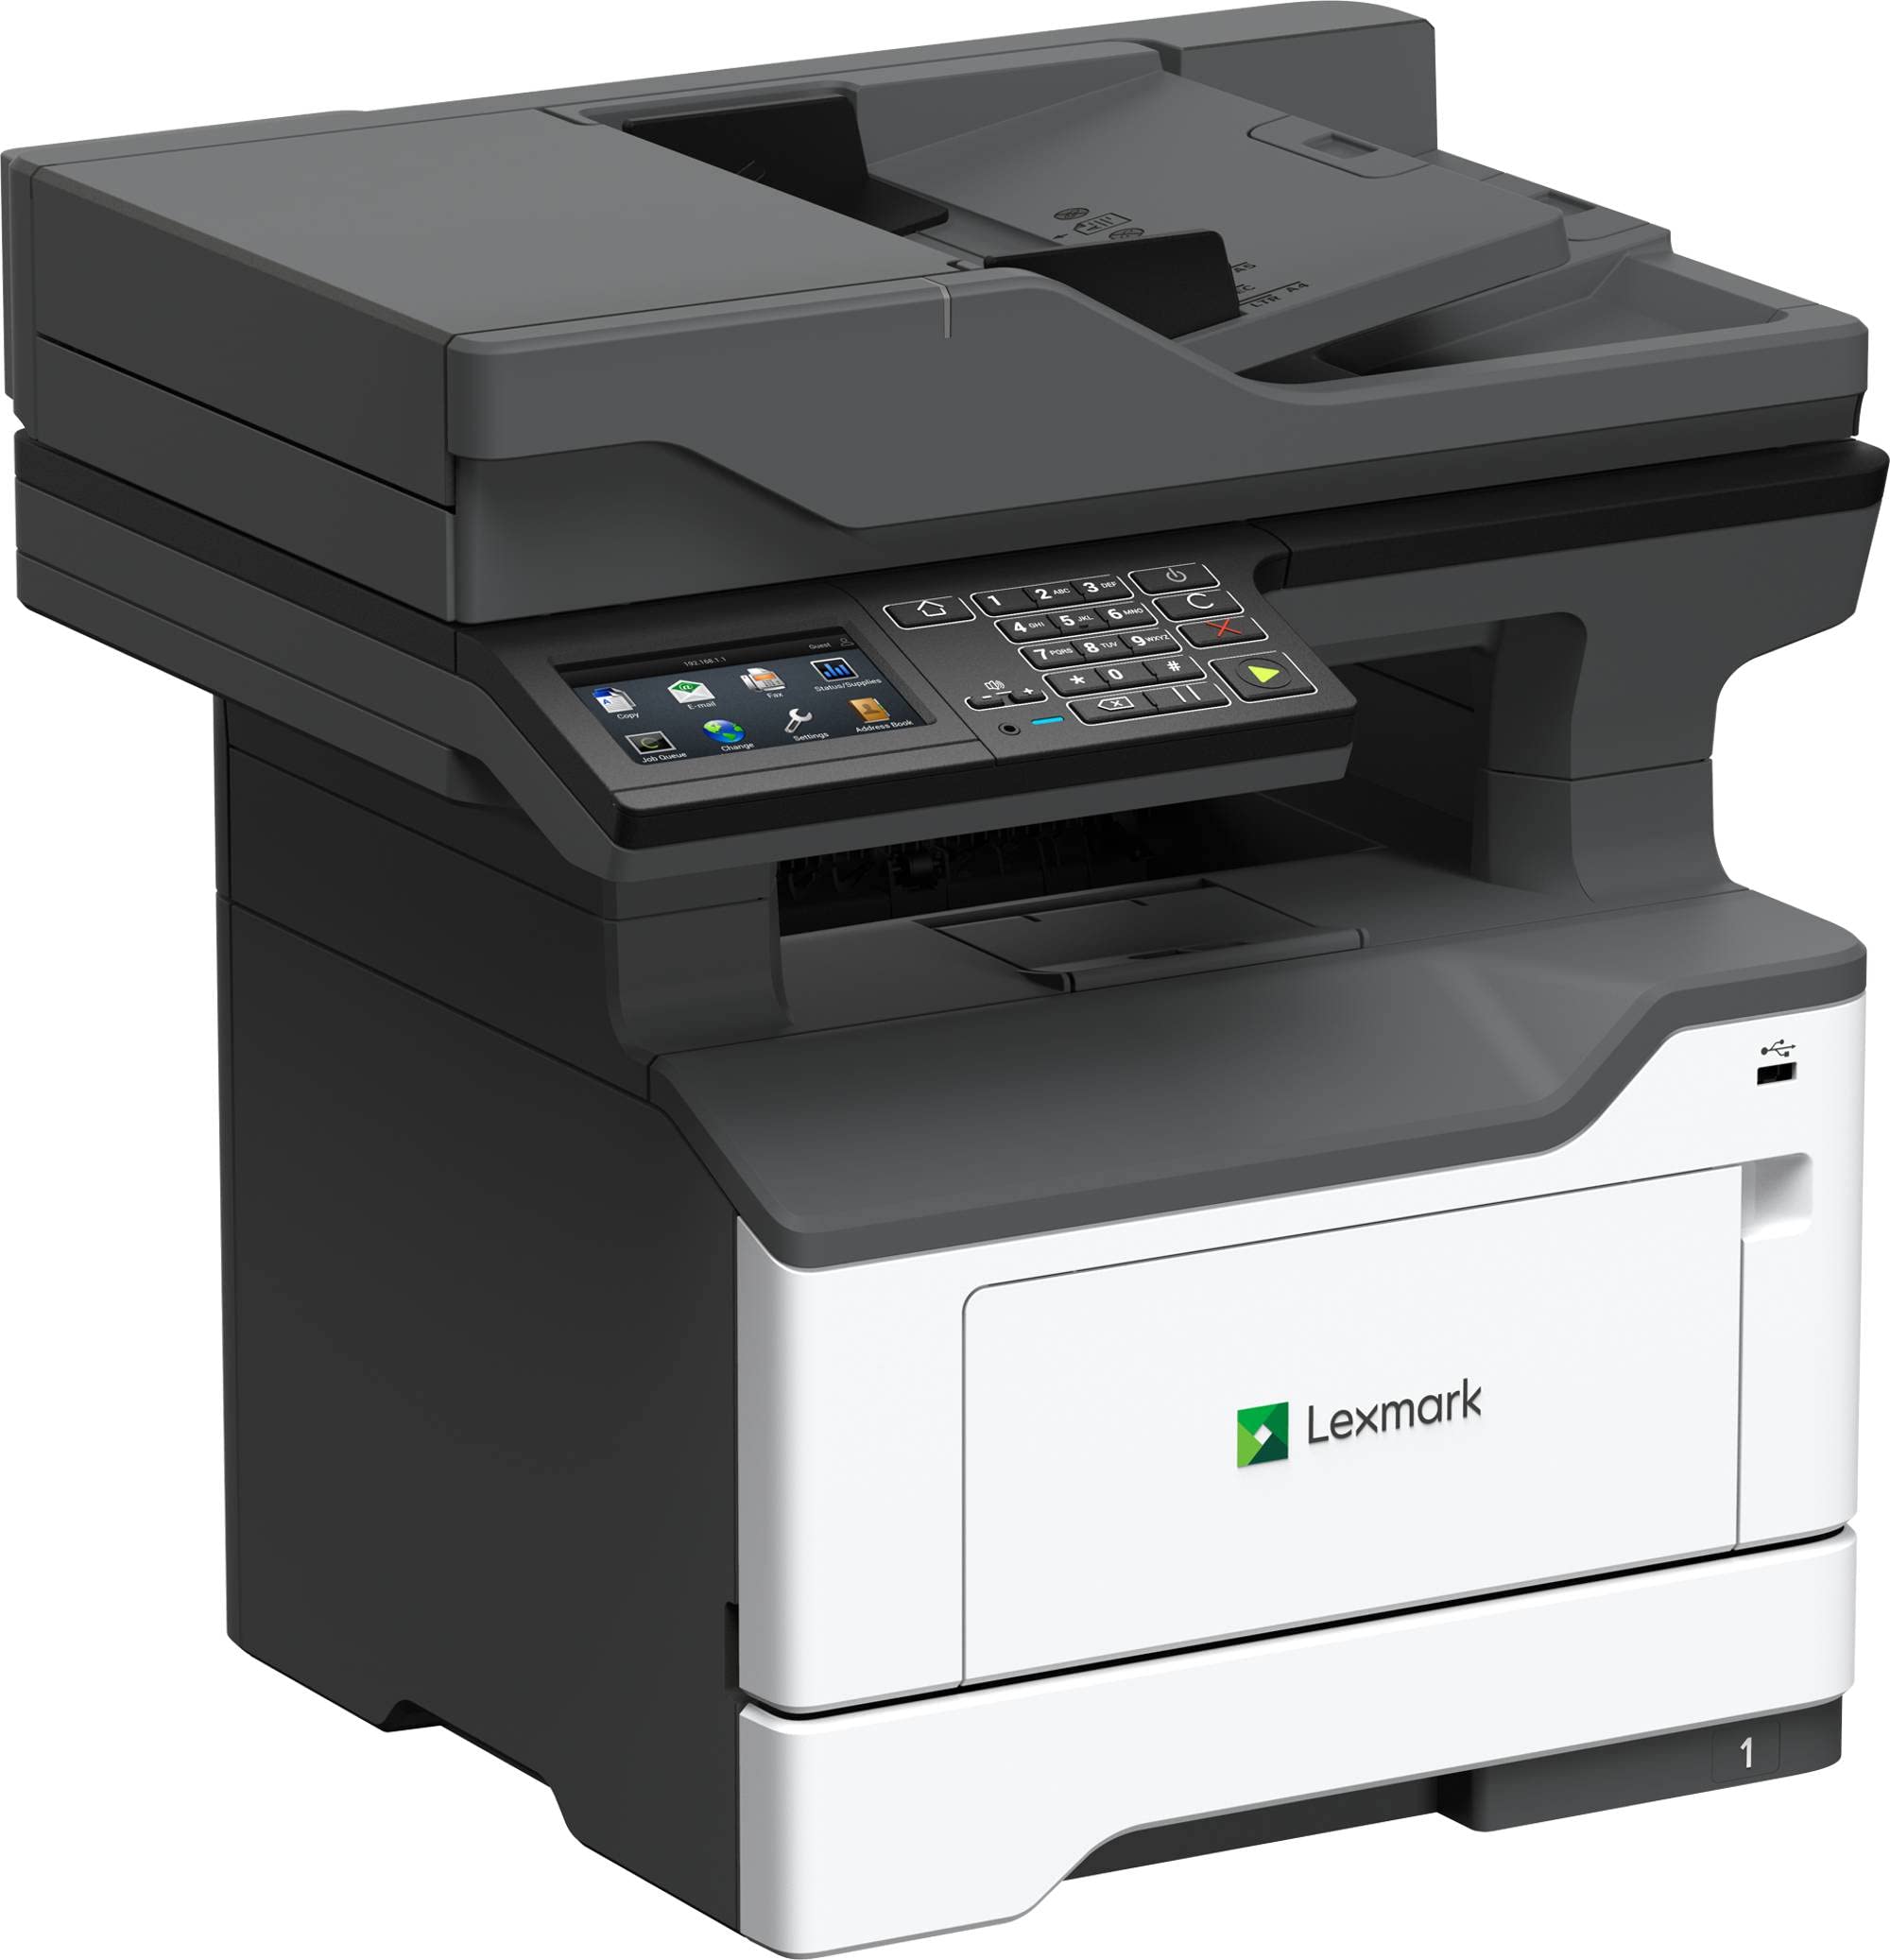 Lexmark MX521de Monochrome All-in One Laser Printer, Scan, Copy, Network Ready, Duplex Printing and Professional Features, Print Speed 46 ppm, Grey, 4.3 inch Touchscreen (36S0800)